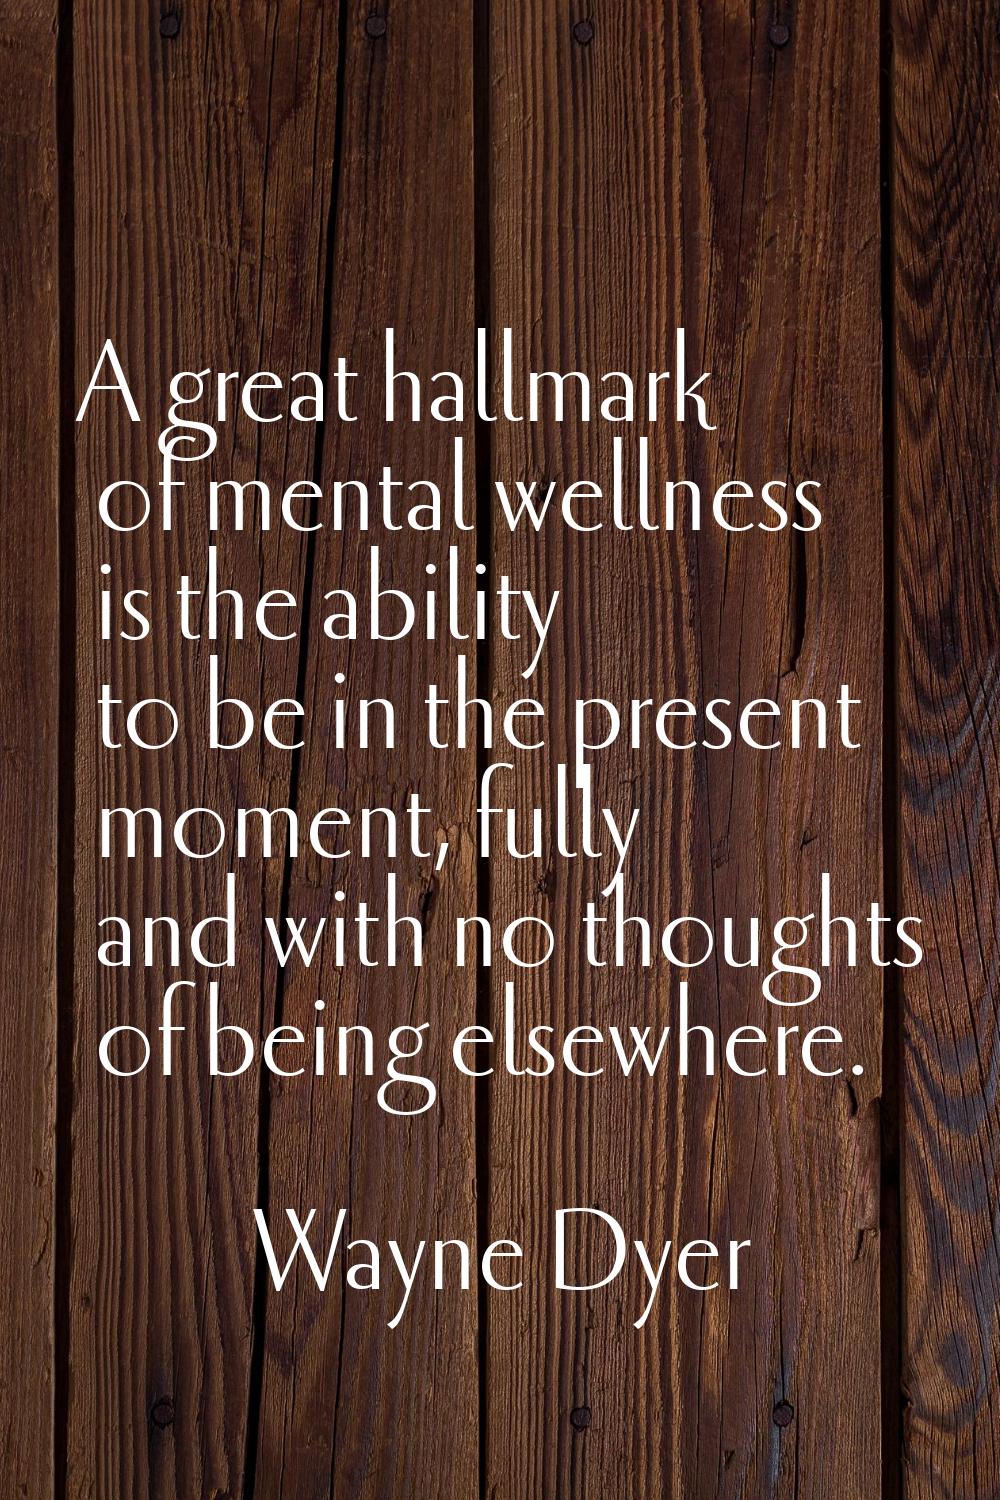 A great hallmark of mental wellness is the ability to be in the present moment, fully and with no t